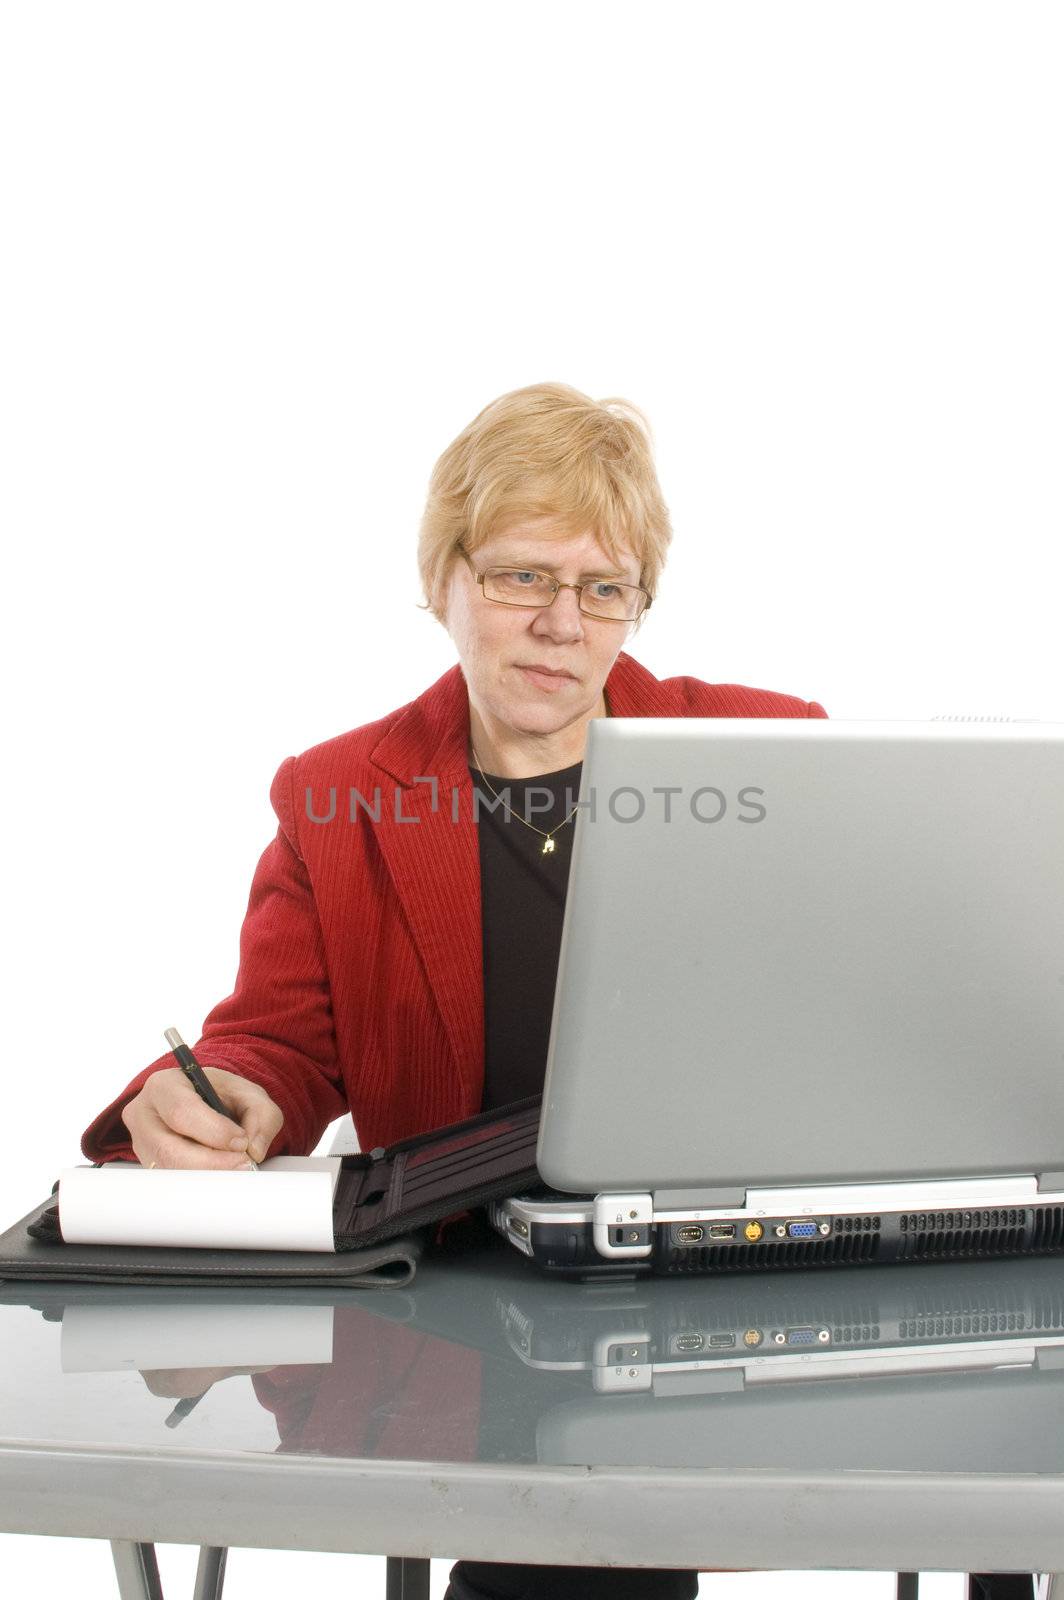 succesfull businesswoman is looking at her finance stats with a smile